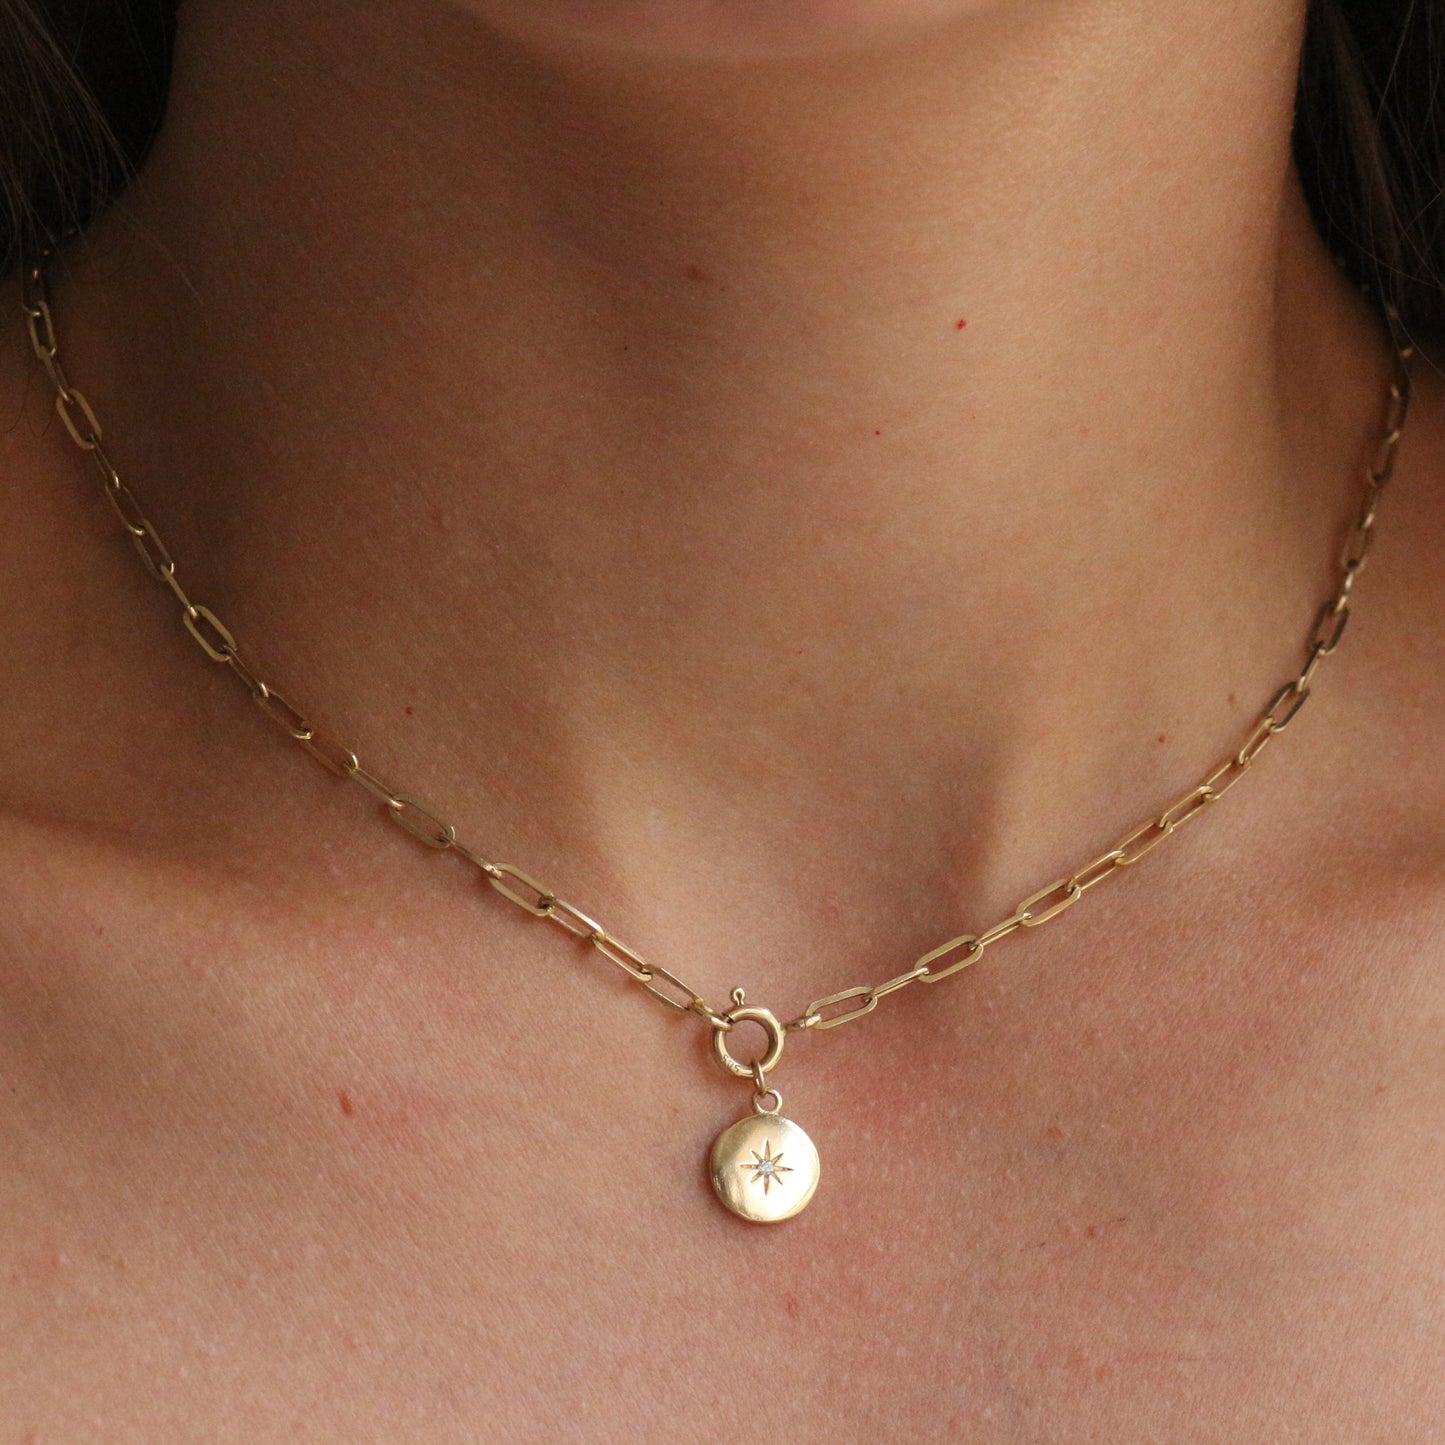 Chunky Northern Star necklace 14k gold